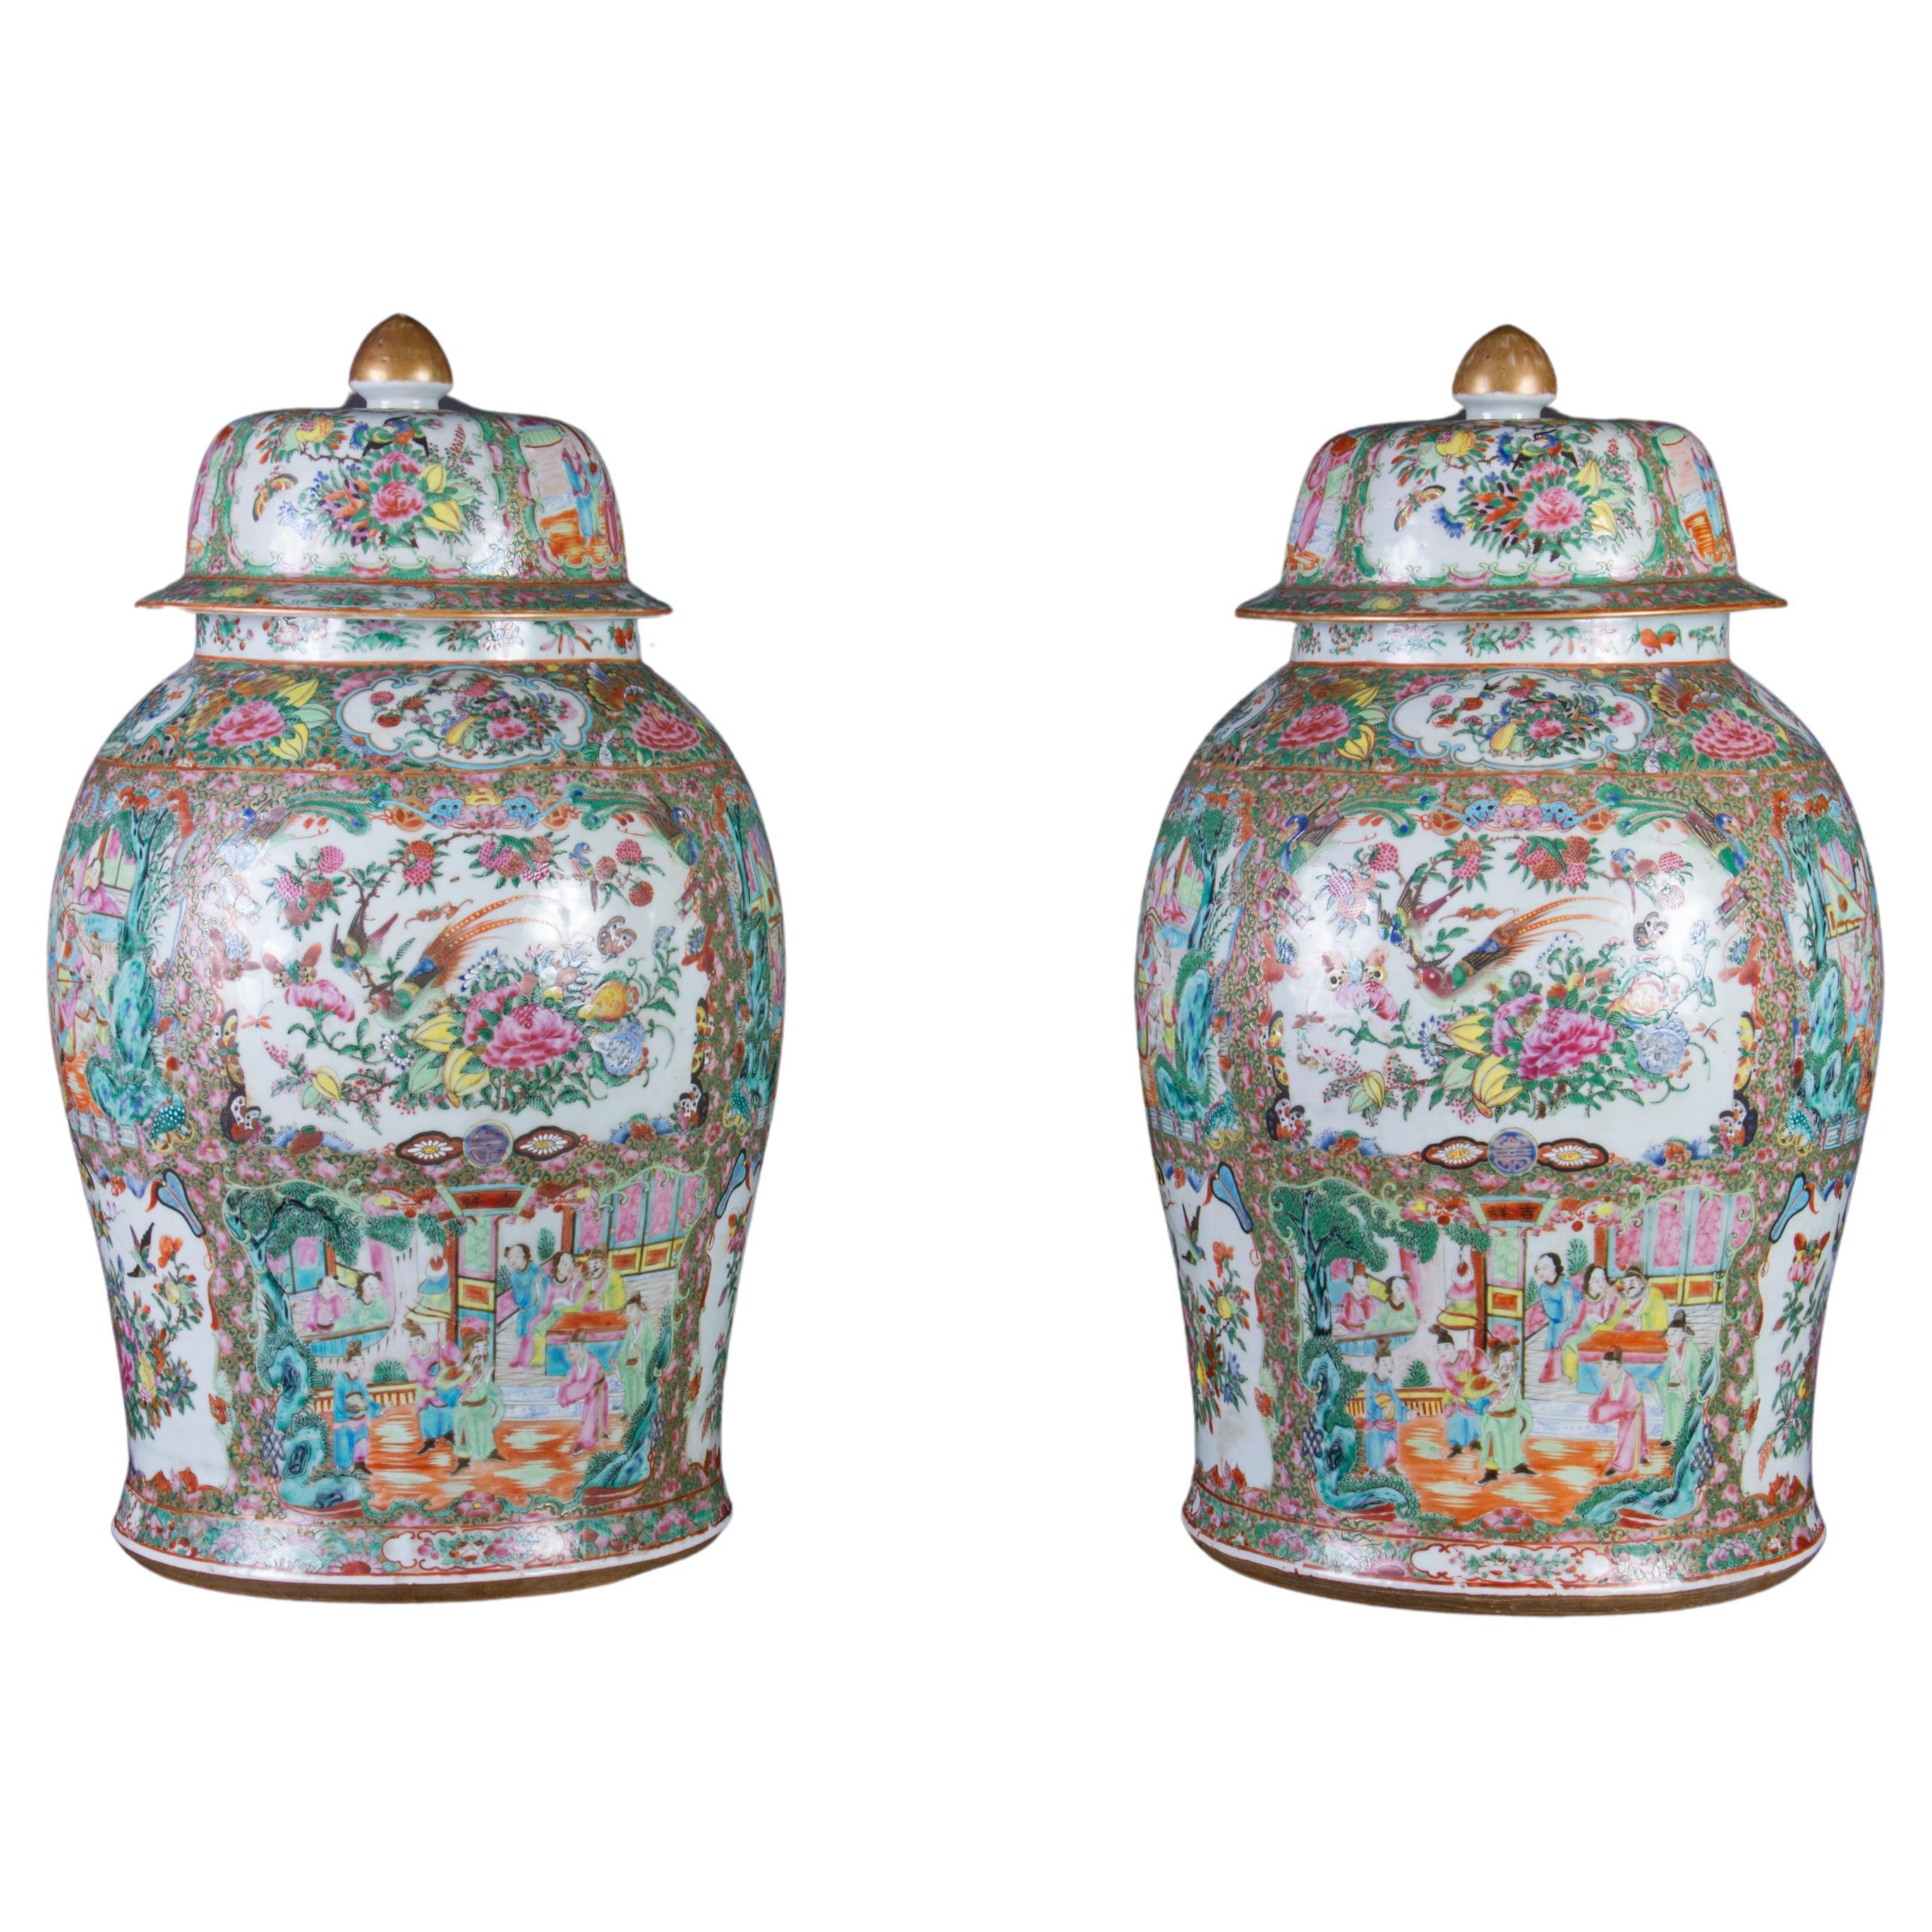 Pair: Exquisite Early 19th Century Chinese Rose Medallion Porcelain Temple Jars